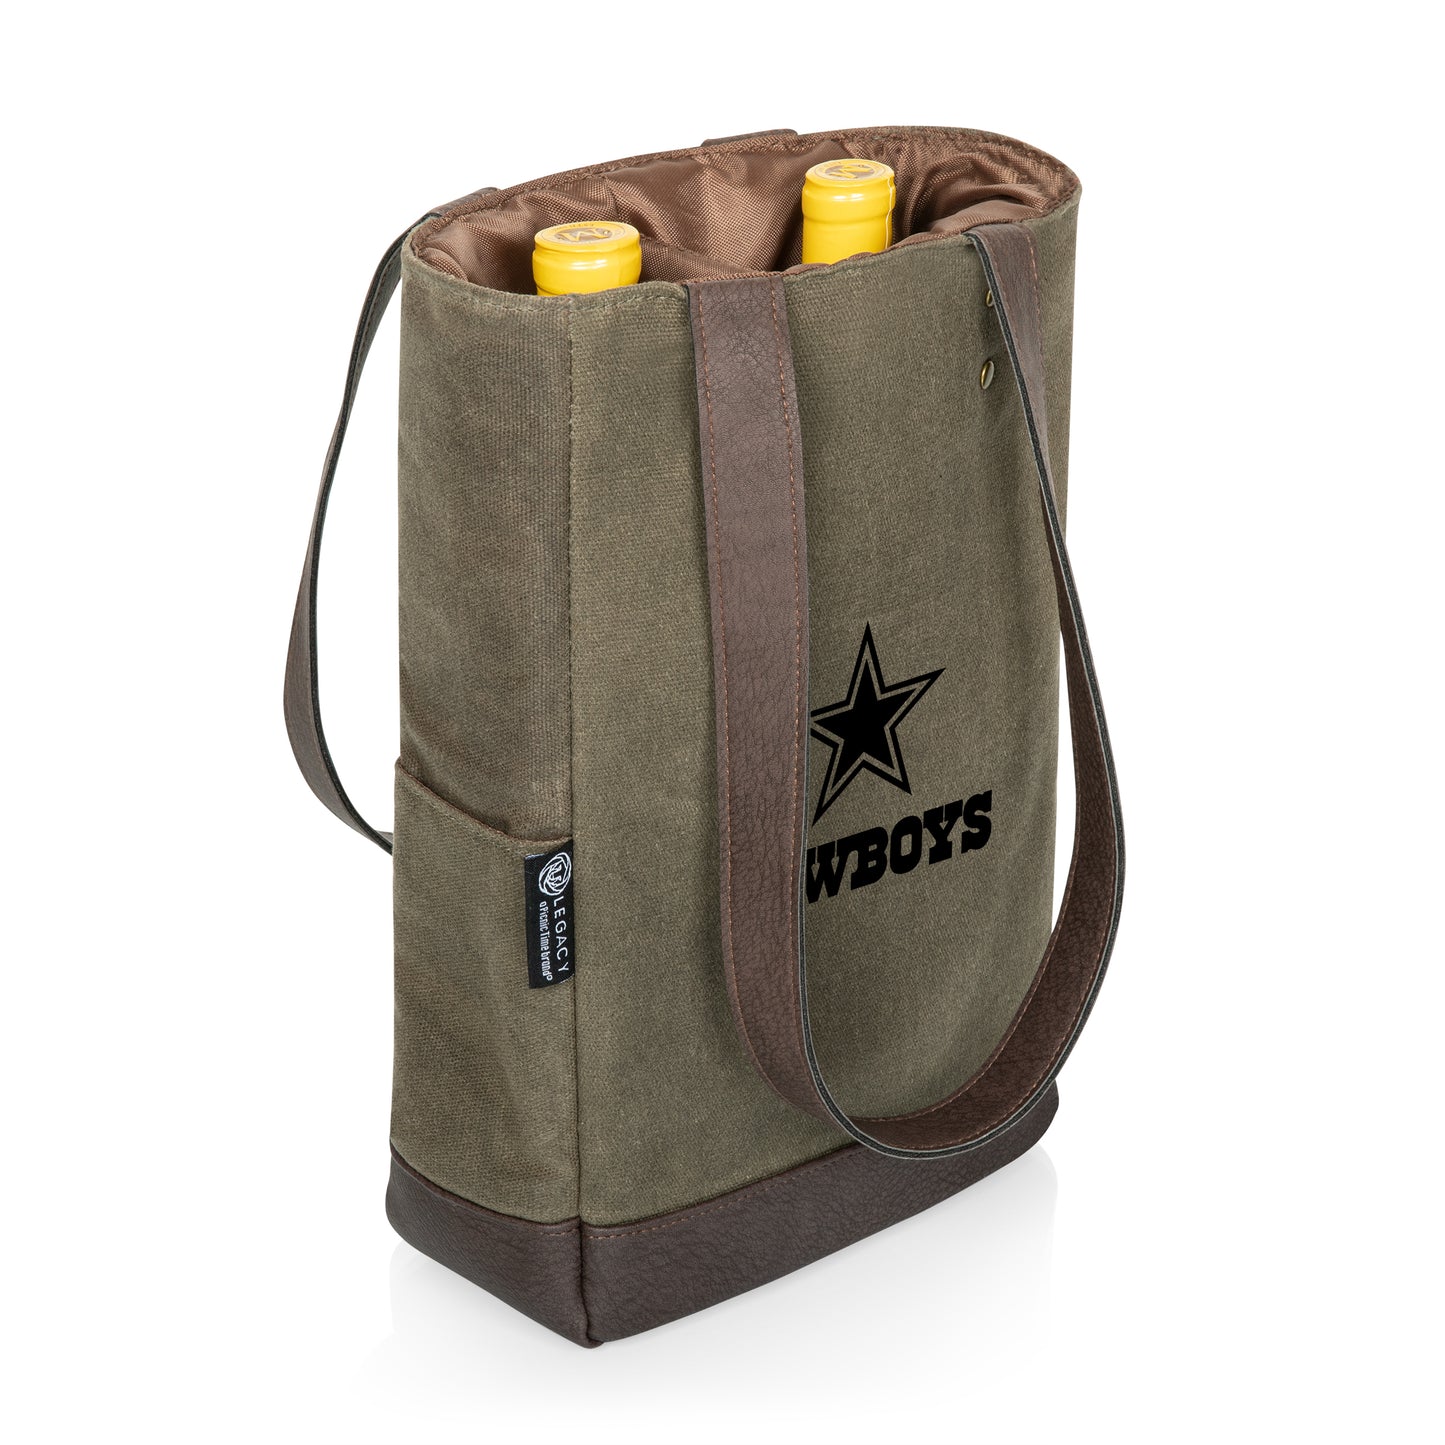 Dallas Cowboys - 2 Bottle Insulated Wine Cooler Bag